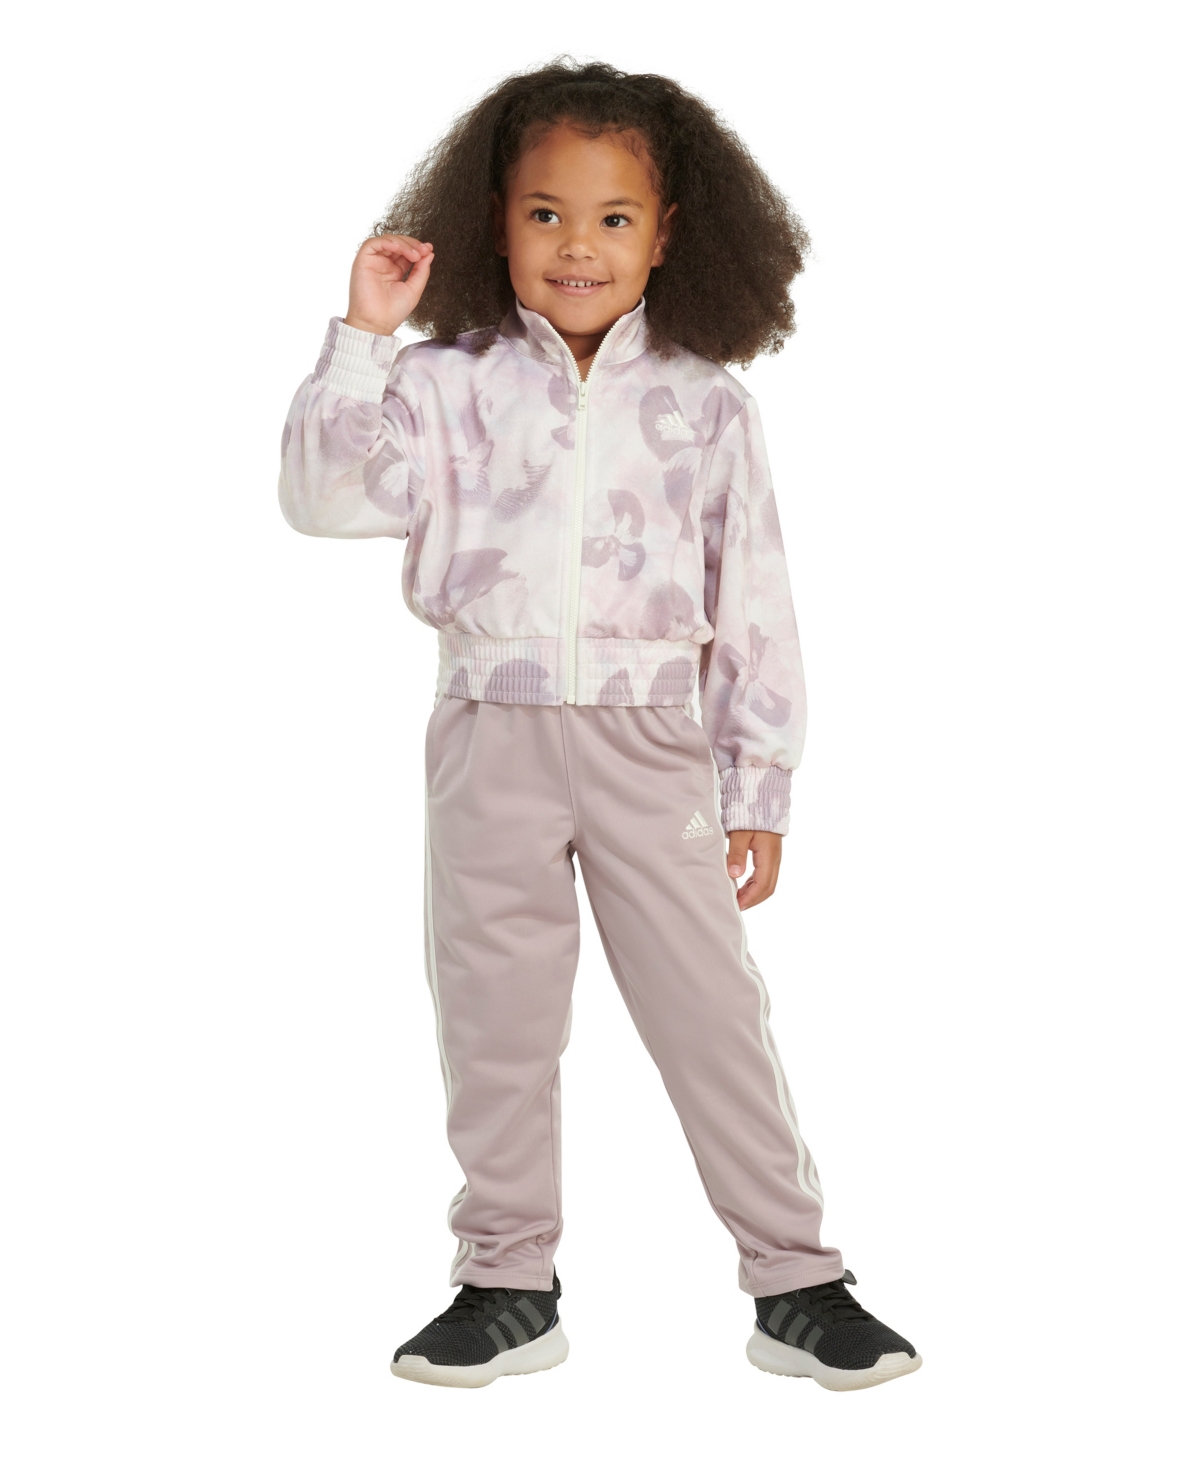 Adidas Originals Kids' Toddler Girls Printed Fashion Tricot Jacket And Pants, 2 Piece Set In Off White